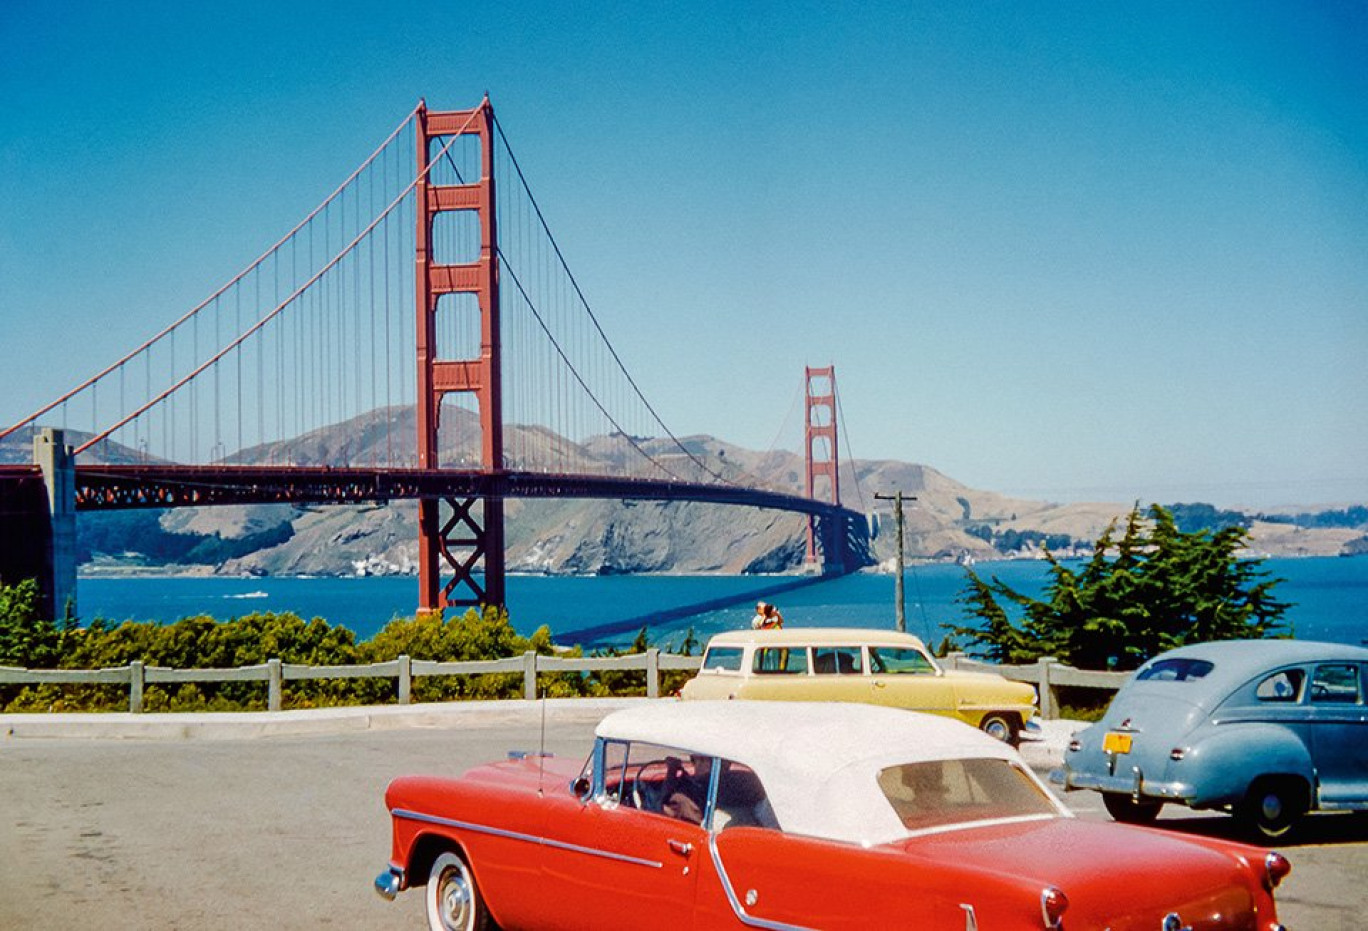 The Golden Gate Bridge and Marin County, as viewed from a parking lot near Fort Point on the San Francisco side, c. 1950s. Anonymous © William Rauum Photo Archive